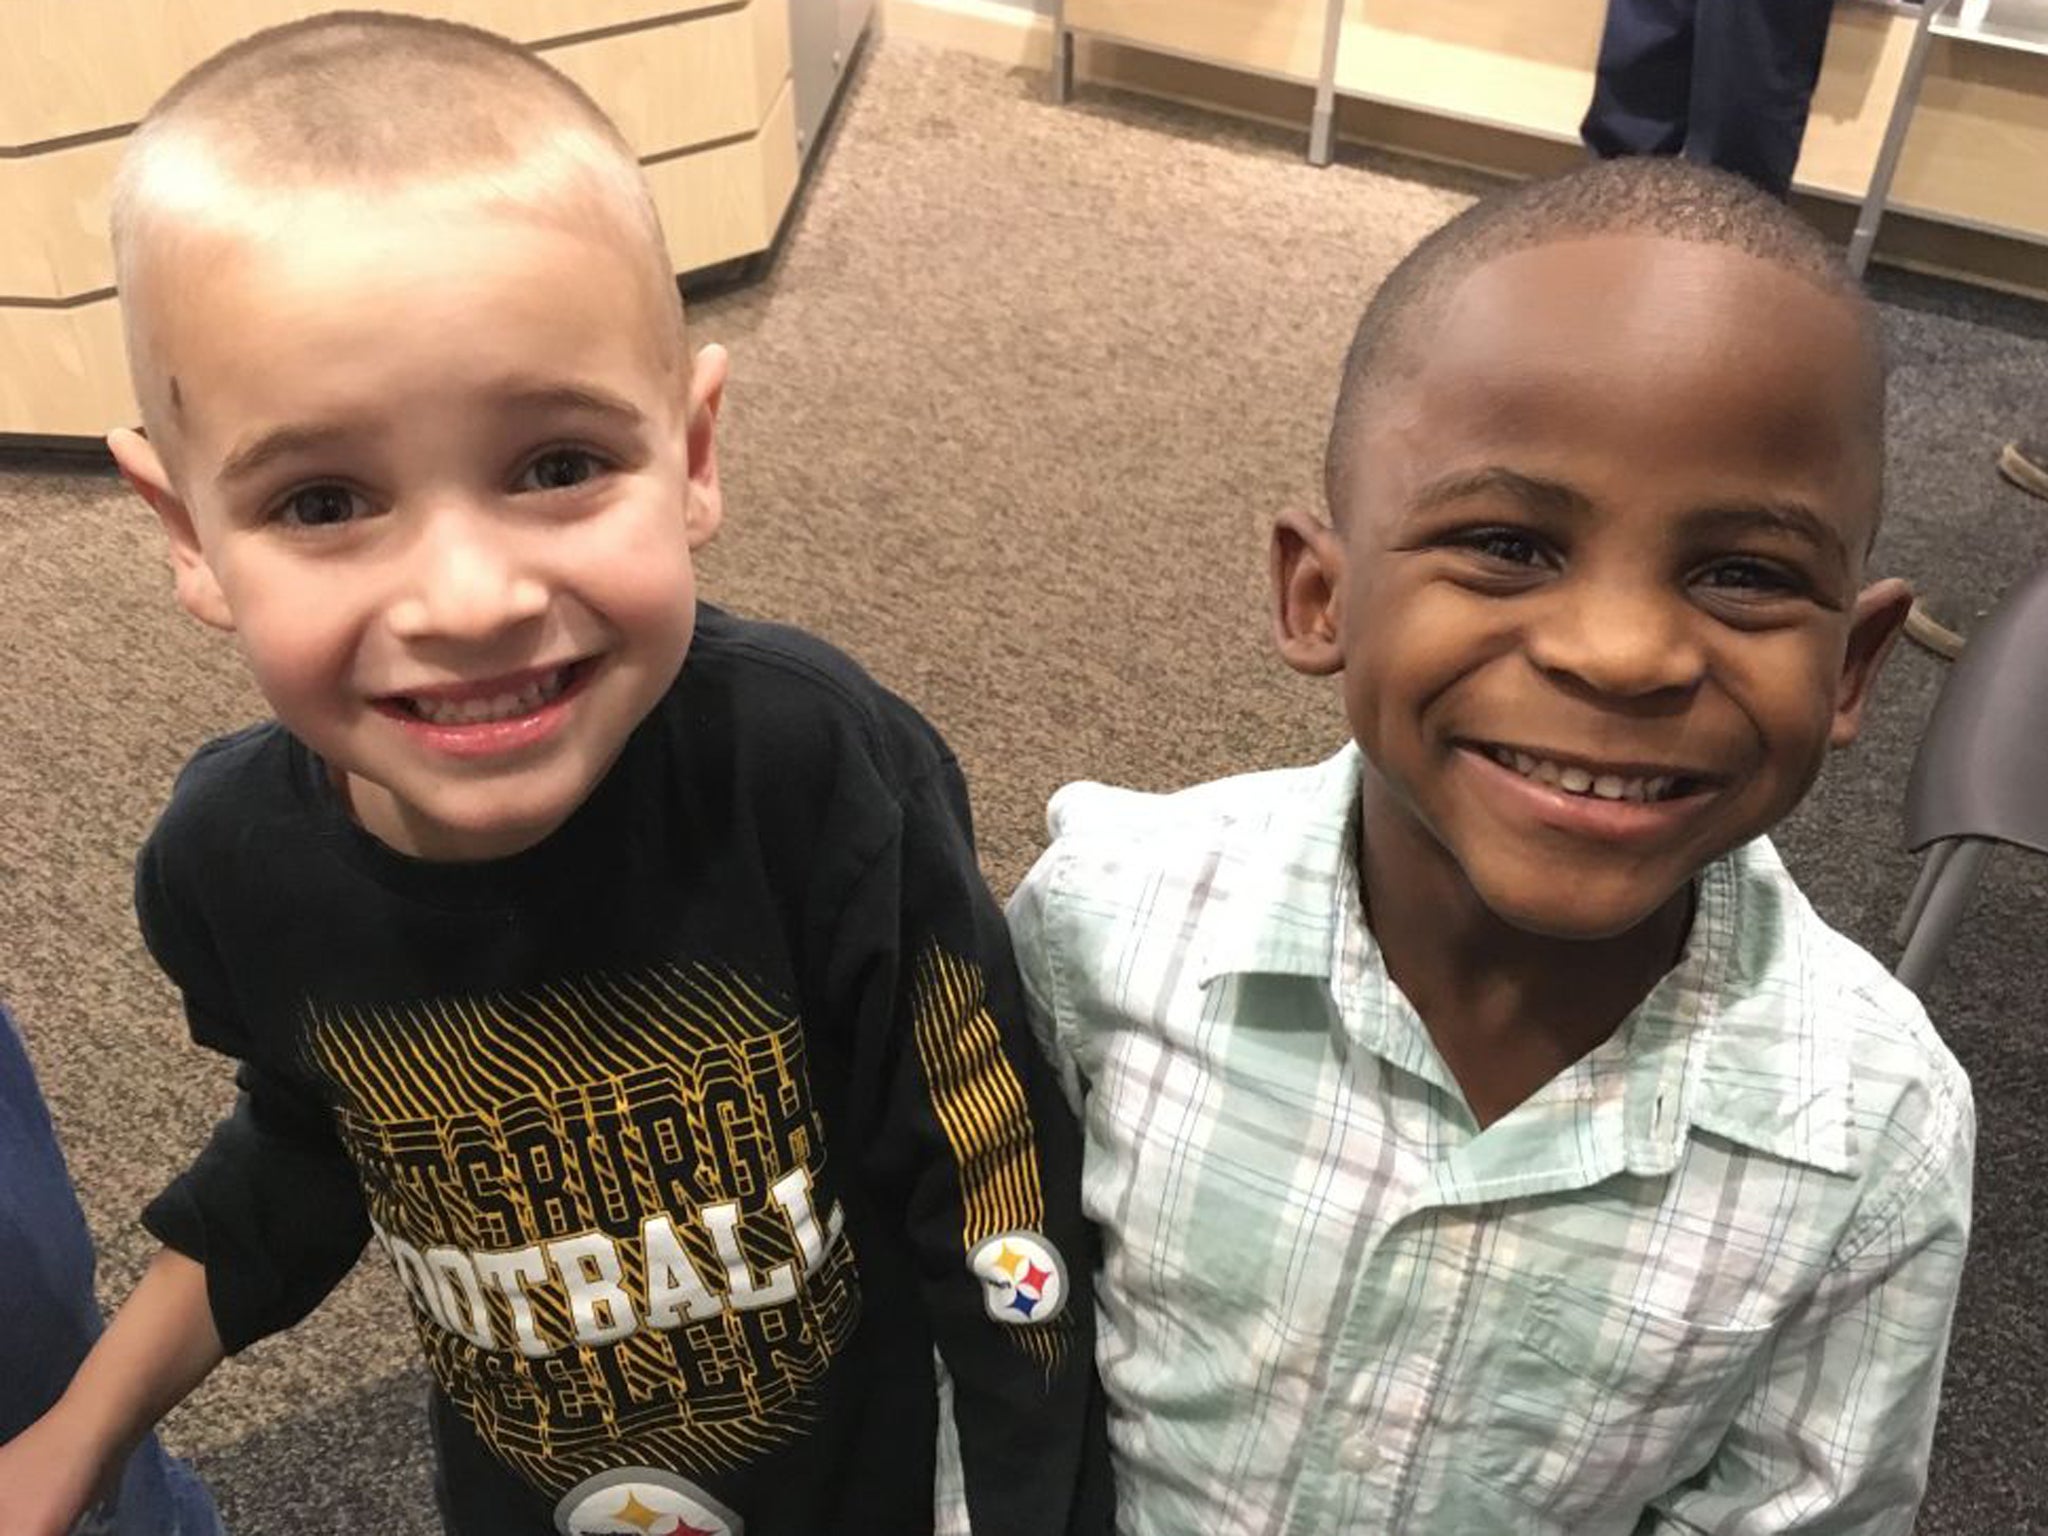 White boy asks for same haircut as black friend so teacher 'won't be able  to tell them apart' | The Independent | The Independent